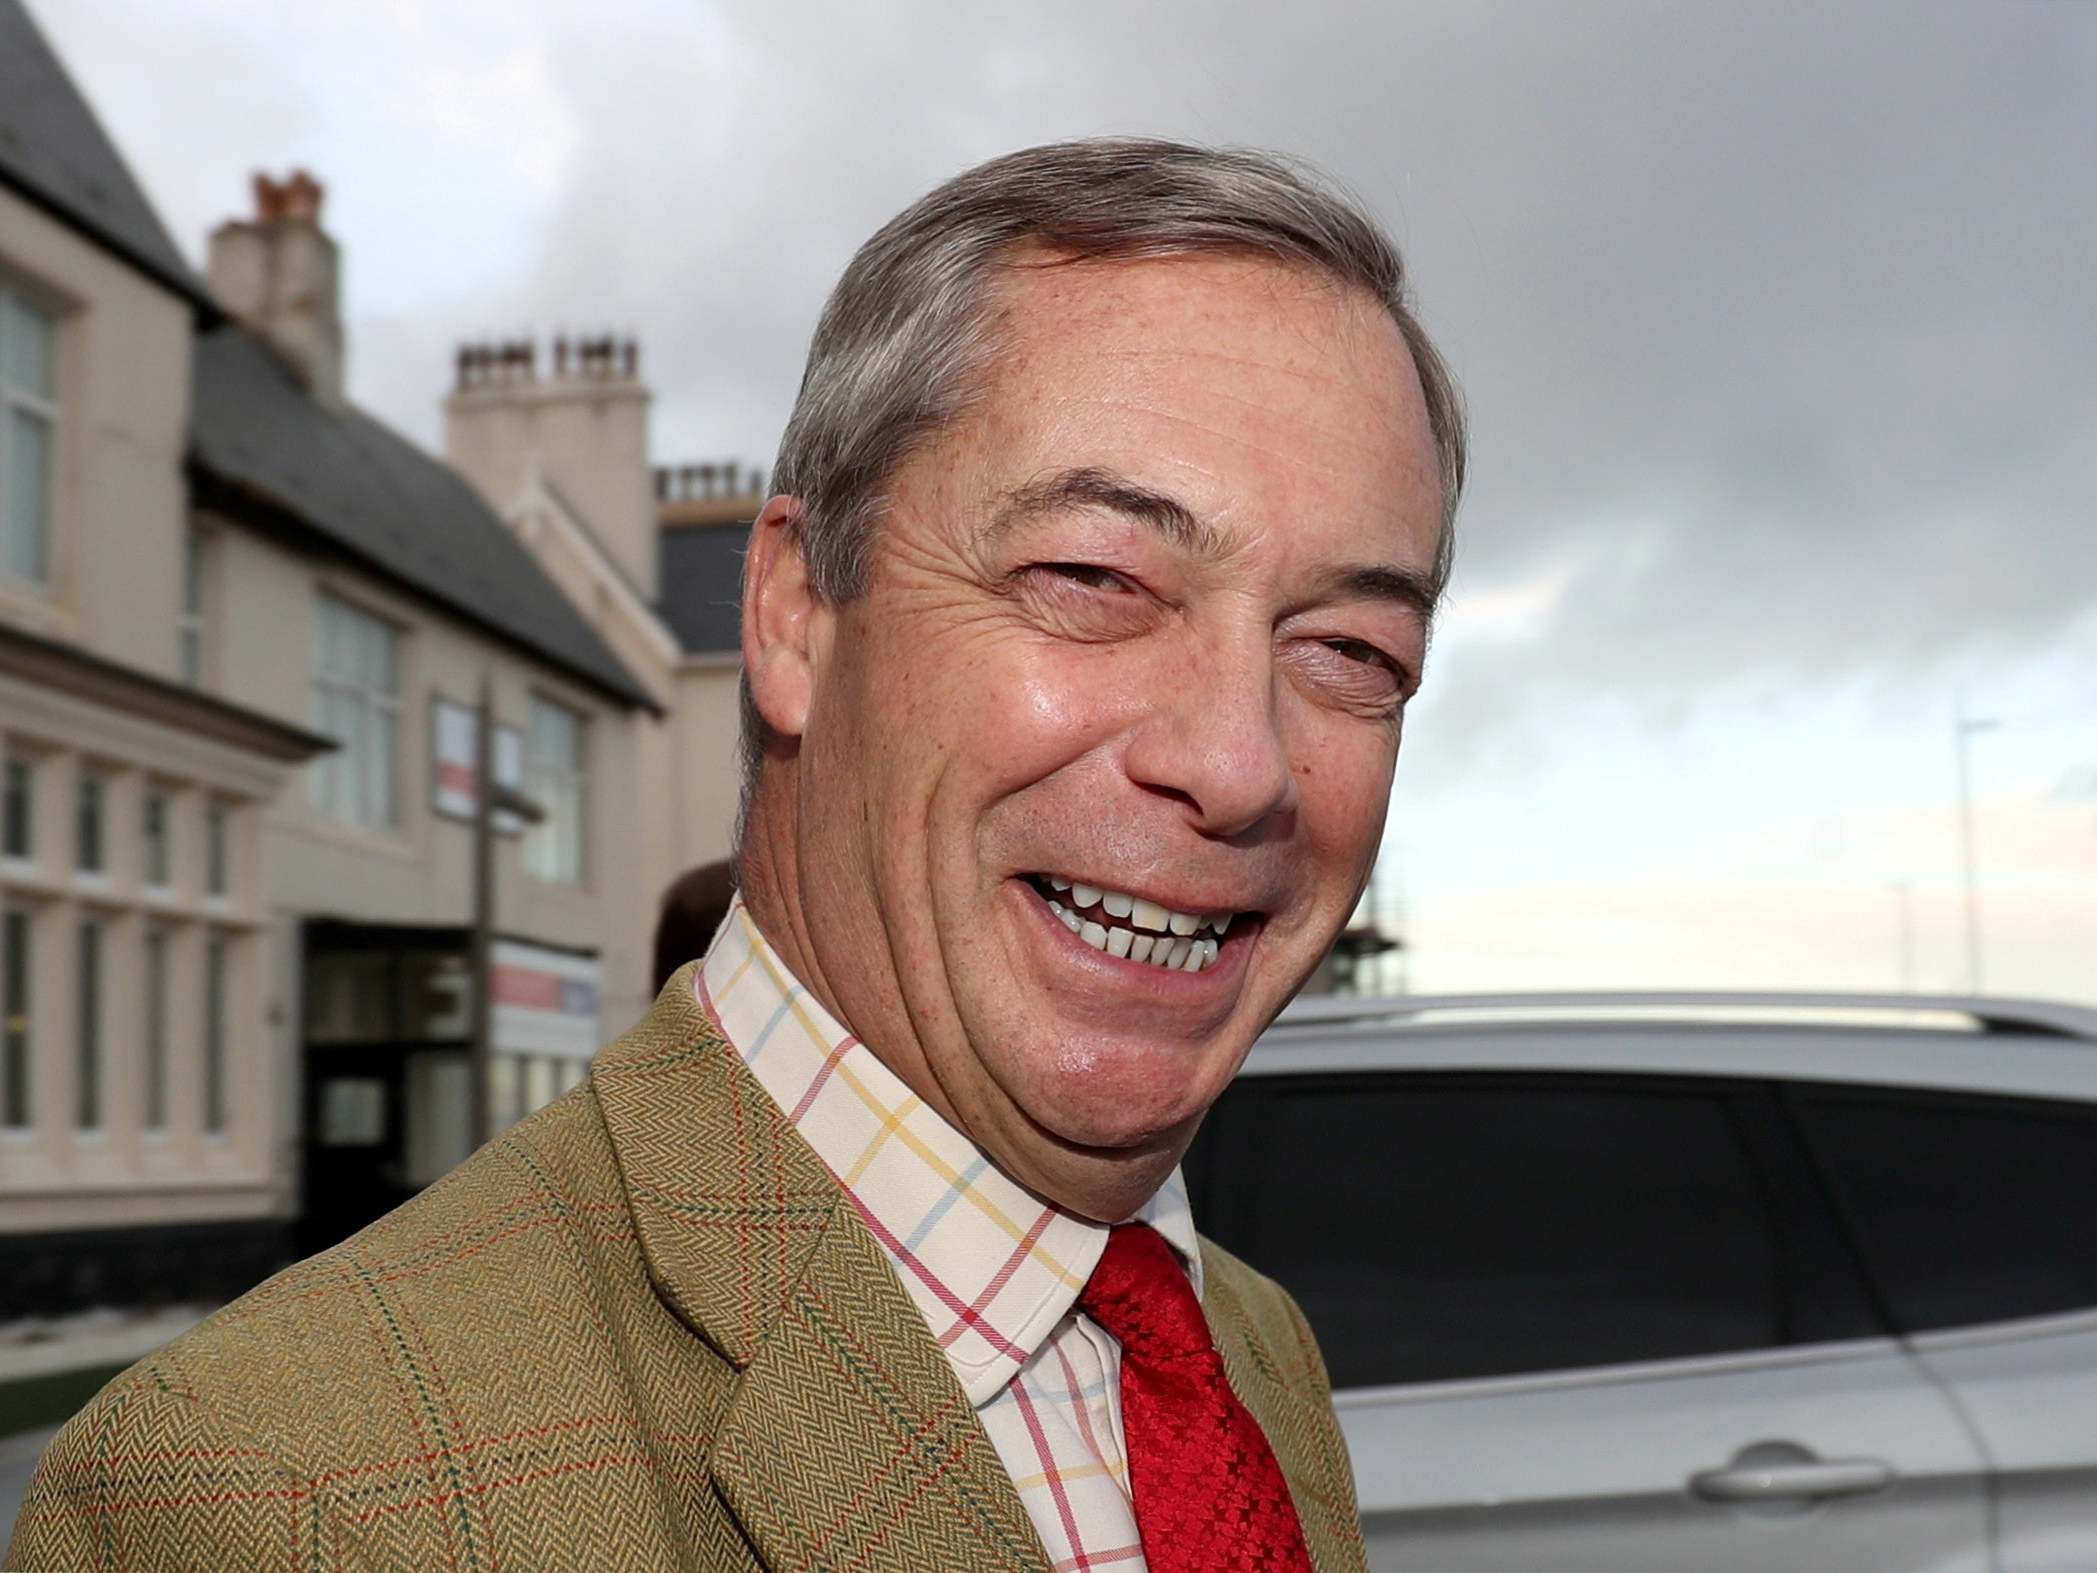 Nigel Farage will be among the speakers in Parliament Square tomorrow evening